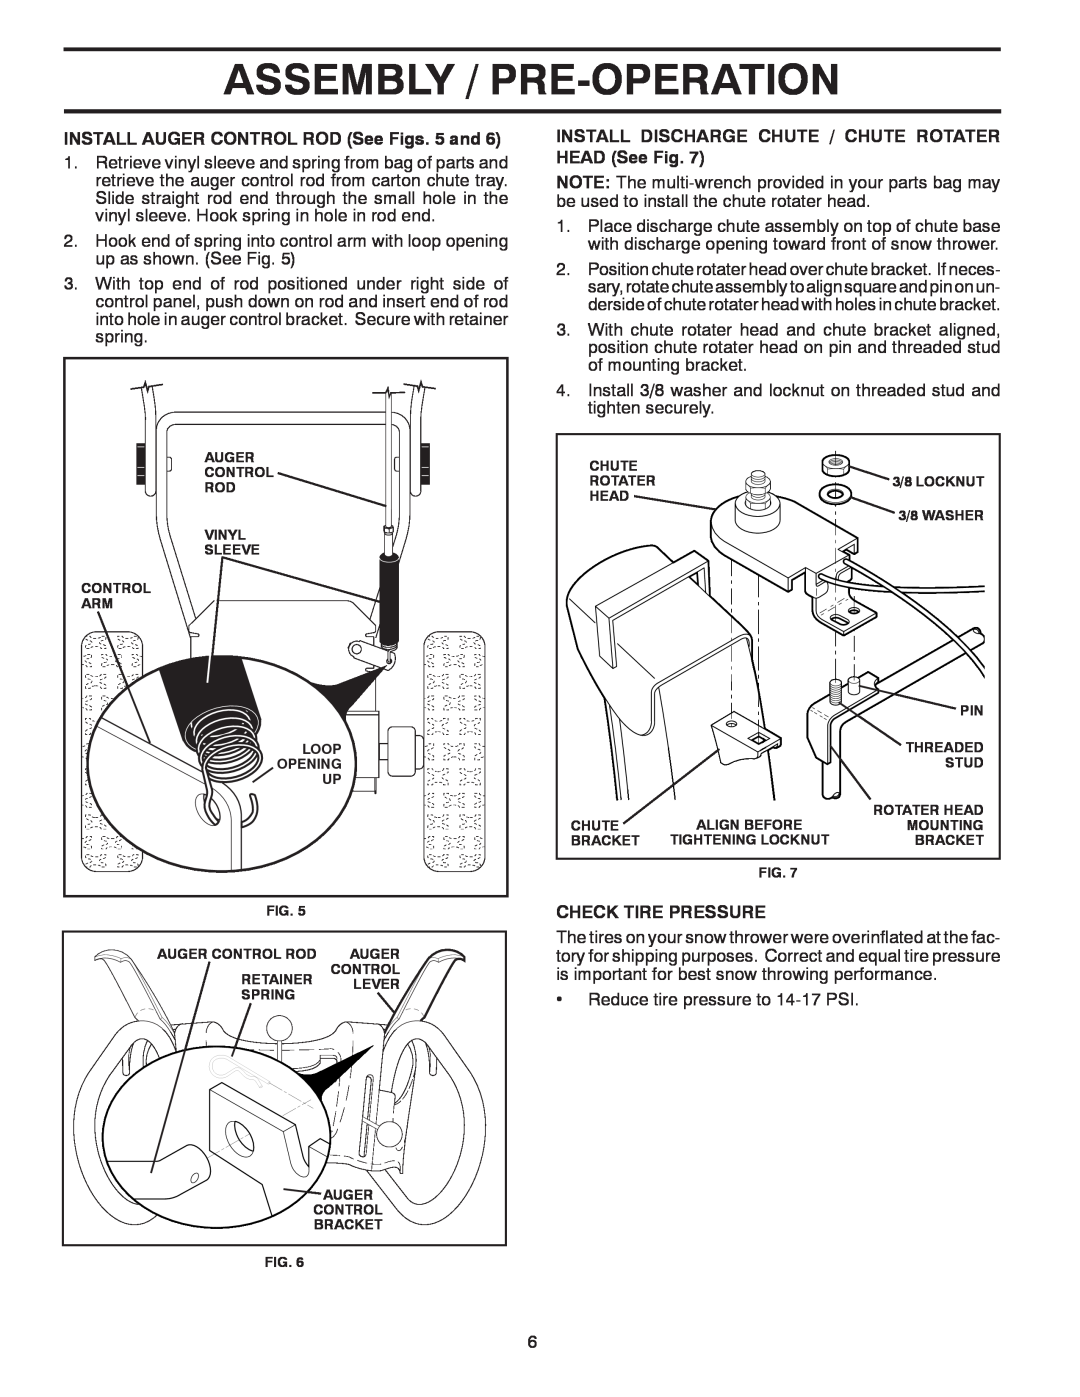 Poulan 435482, 96192003800 Assembly / Pre-Operation, INSTALL AUGER CONTROL ROD See Figs. 5 and, Check Tire Pressure 